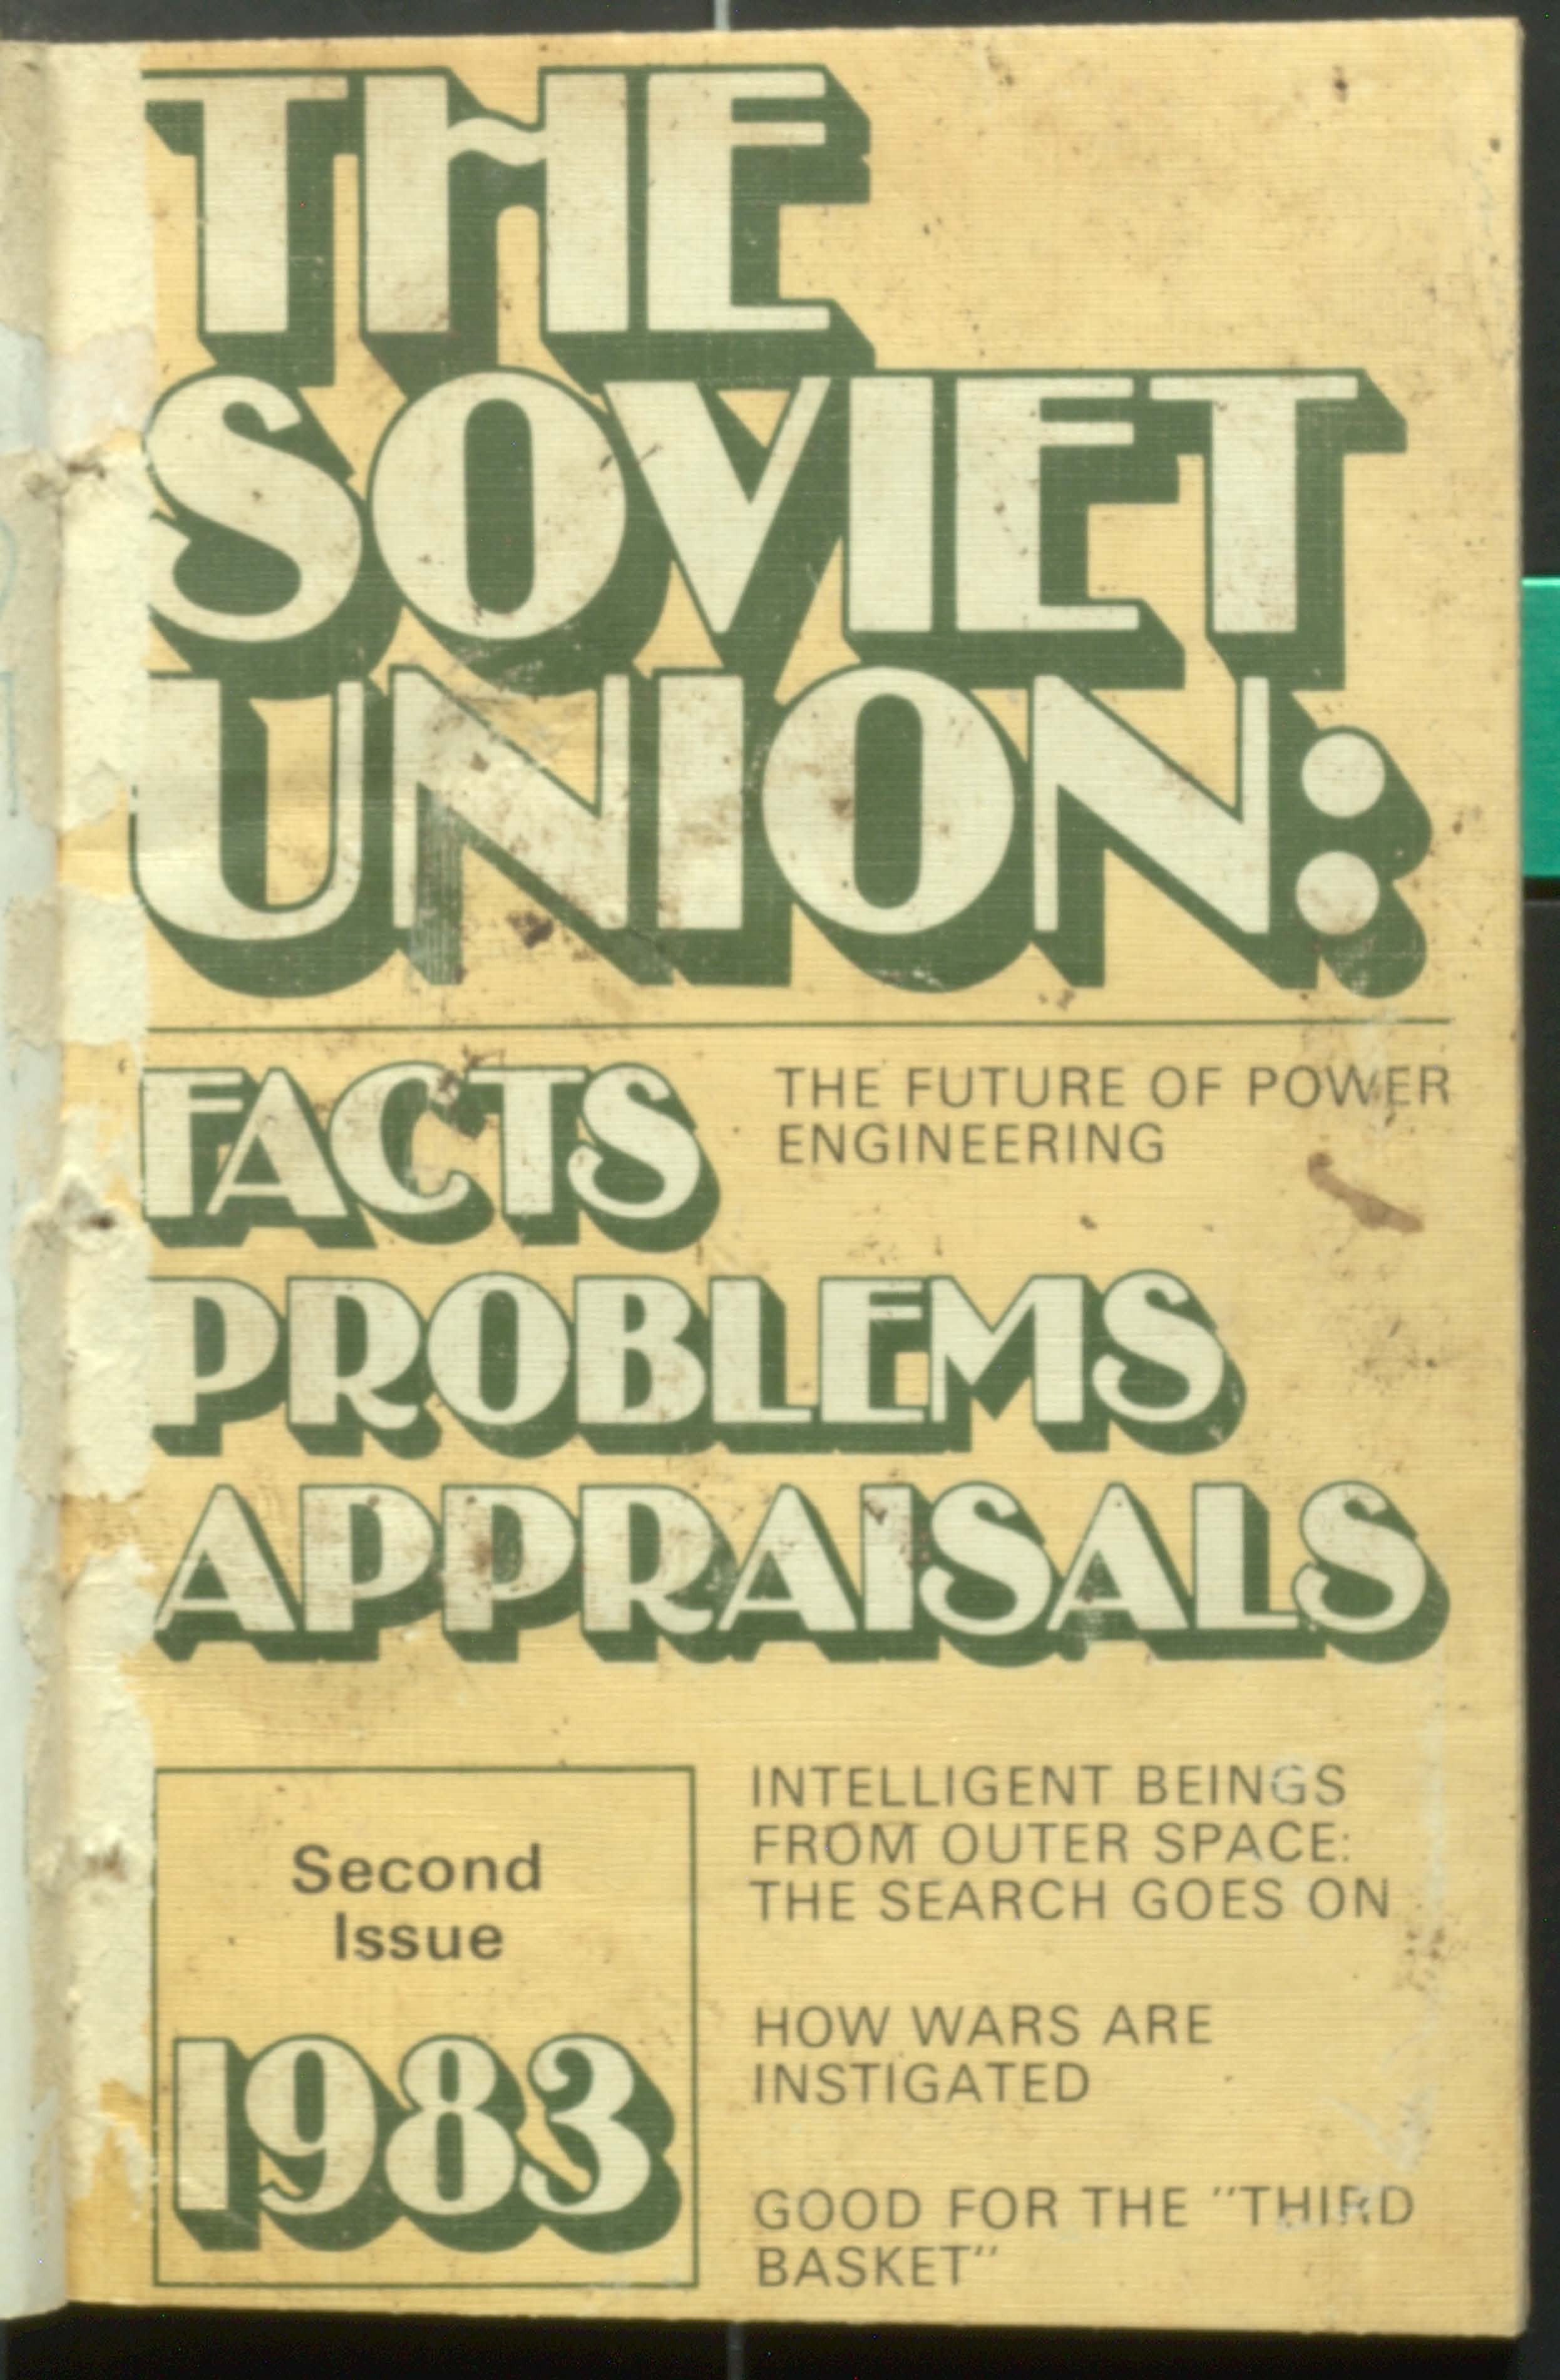 The Soviet union: Facts problems Appraisals (second issue1983)